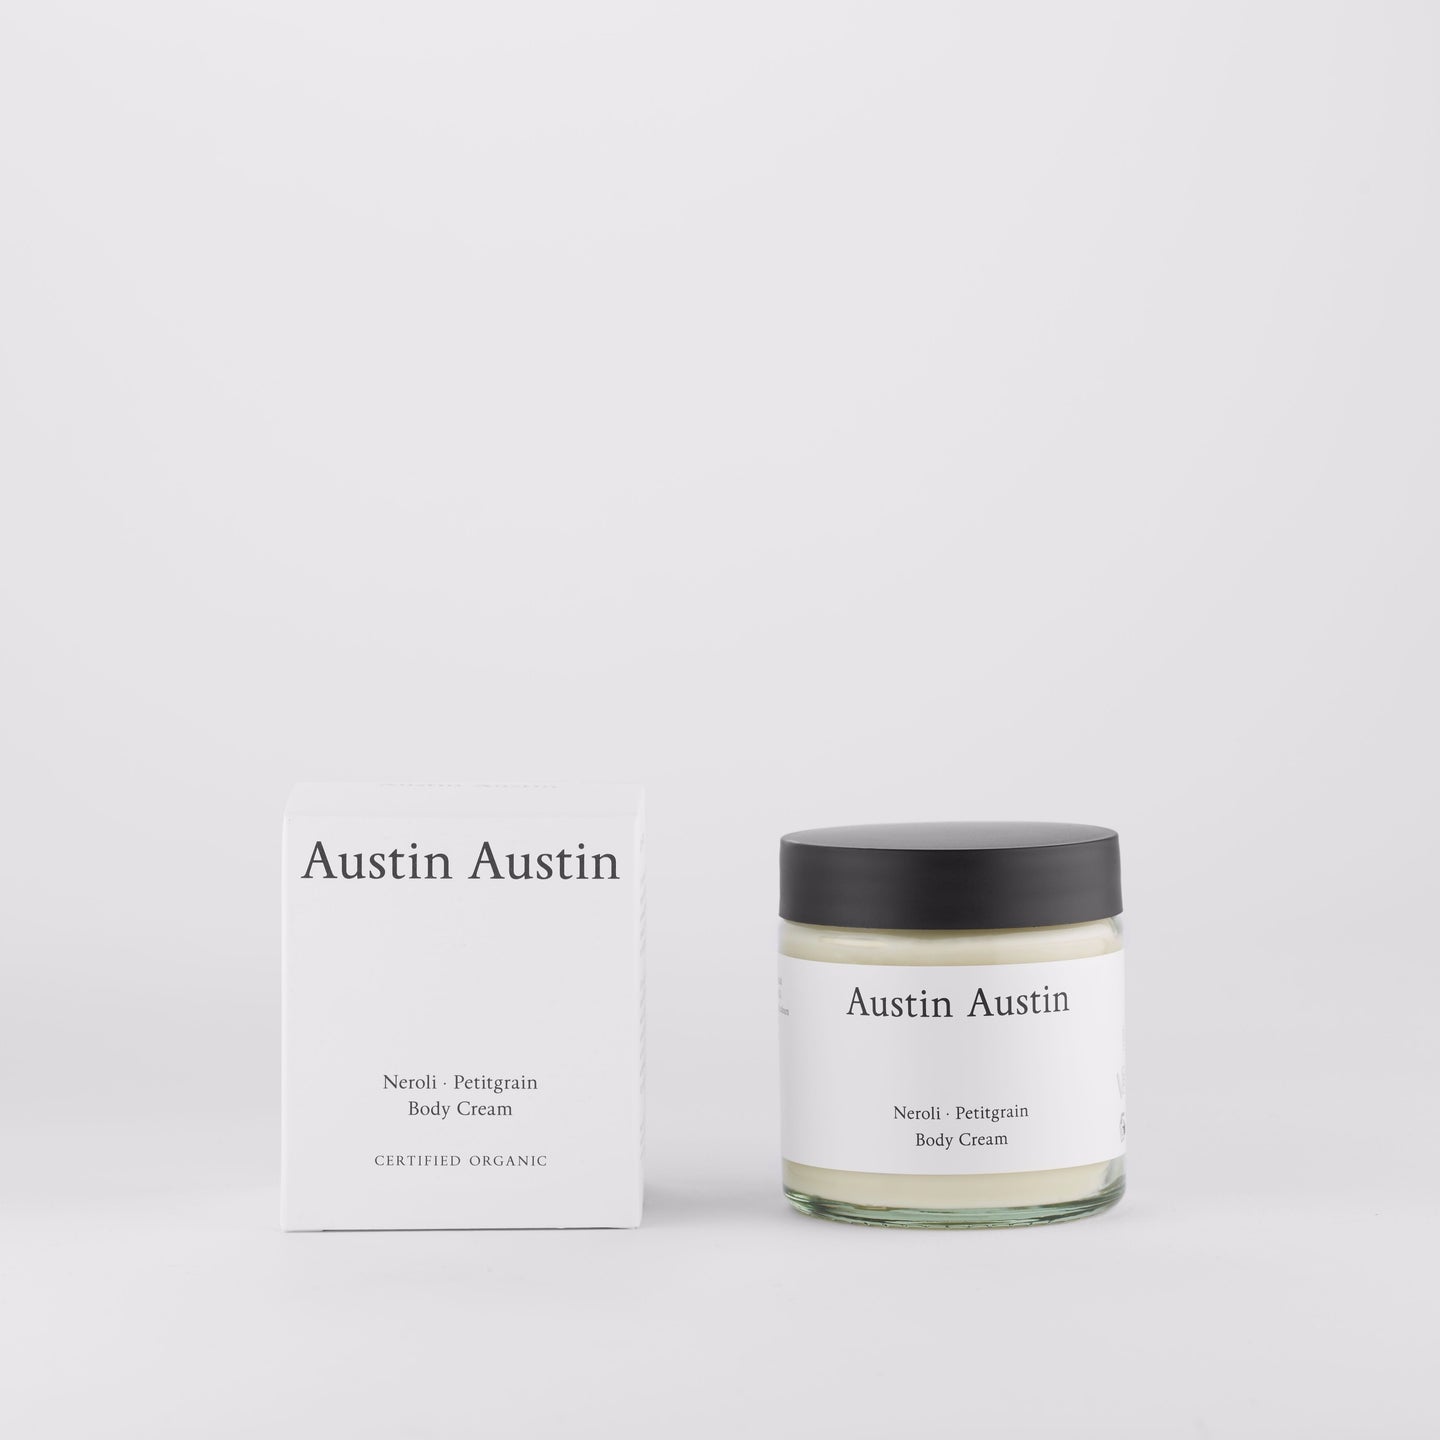 Austin Austin Organic Body lotion cream Made with betaine to soothe, moisturise & protect. Top notes of orange & grapefruit.  Middle notes of neroli & cardamom. Base notes of petitgrain & cedar wood.